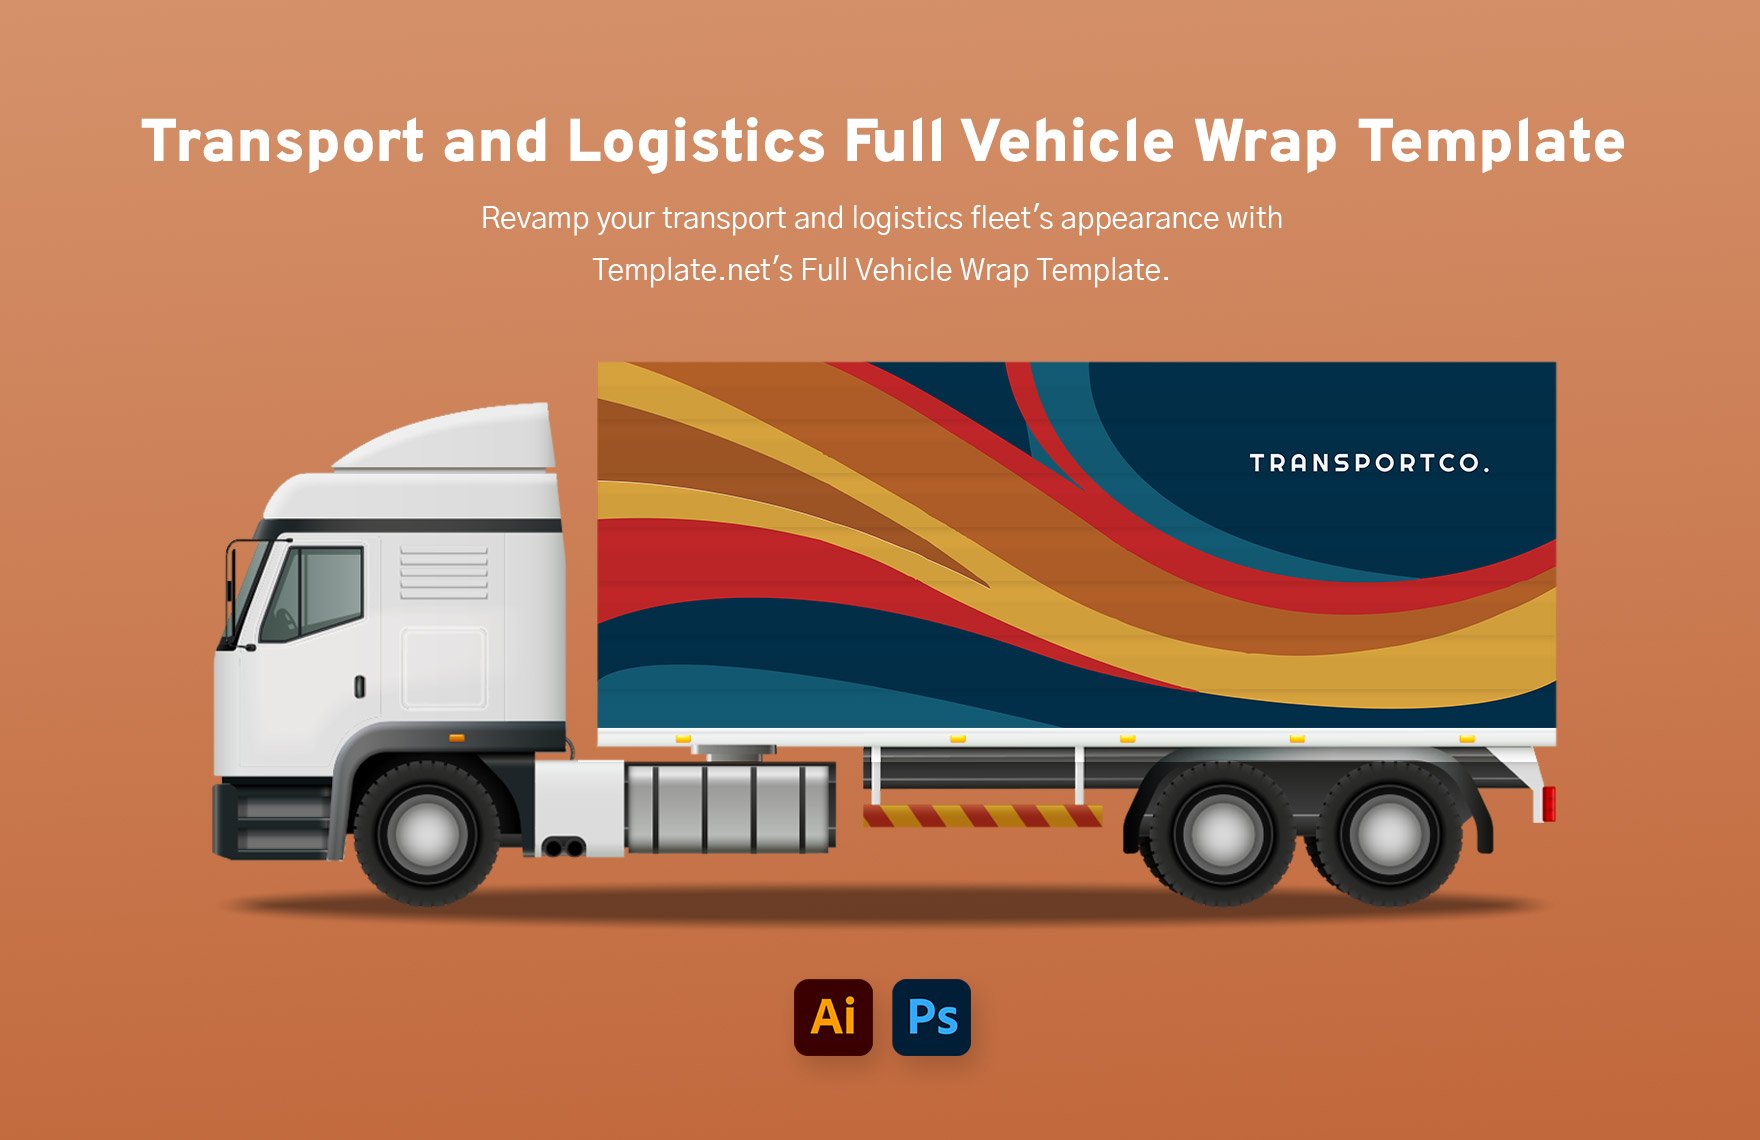 Transport and Logistics Full Vehicle Wrap Template in Illustrator, PSD